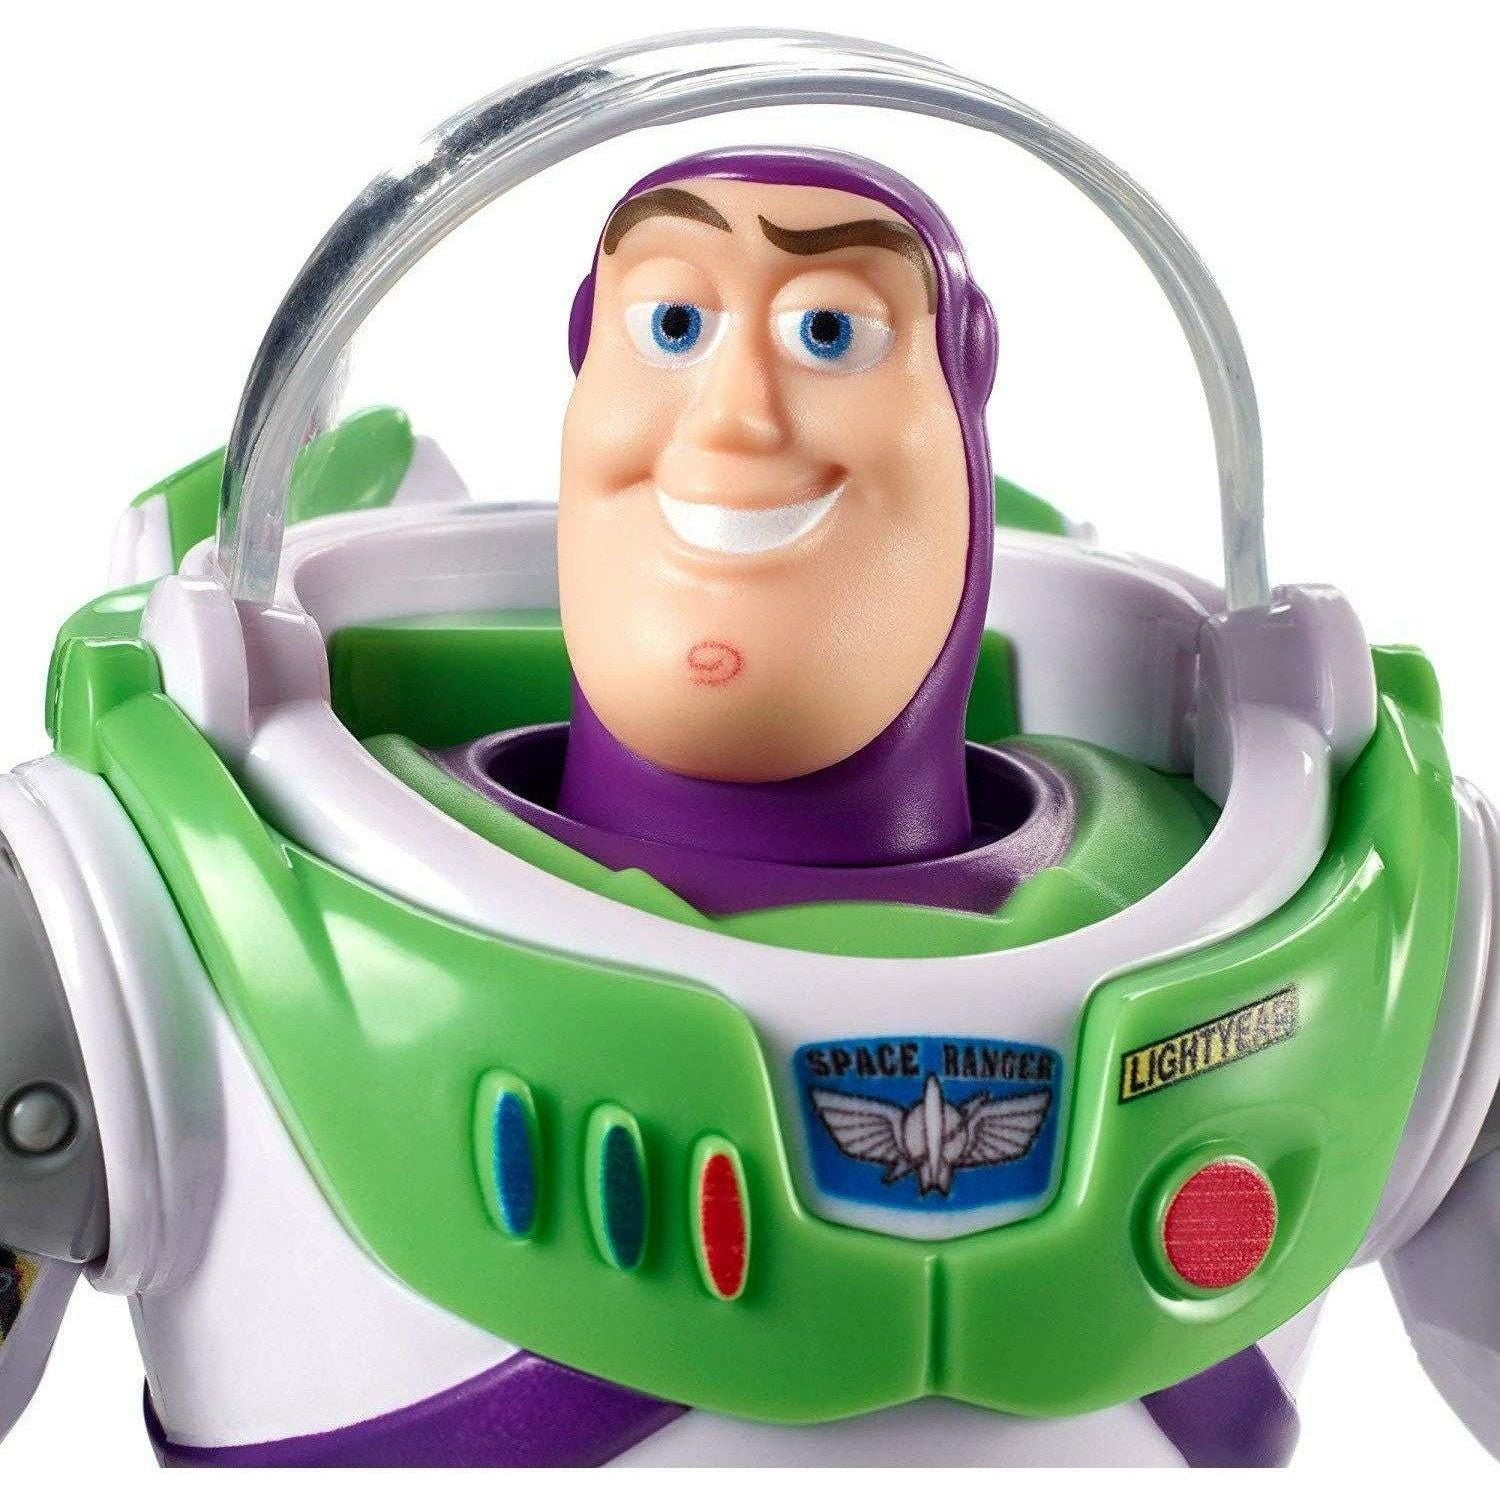 Disney Pixar Toy Story Buzz with Shield Figure - BumbleToys - 5-7 Years, Boys, Buzz light year, Figures, Toy Story